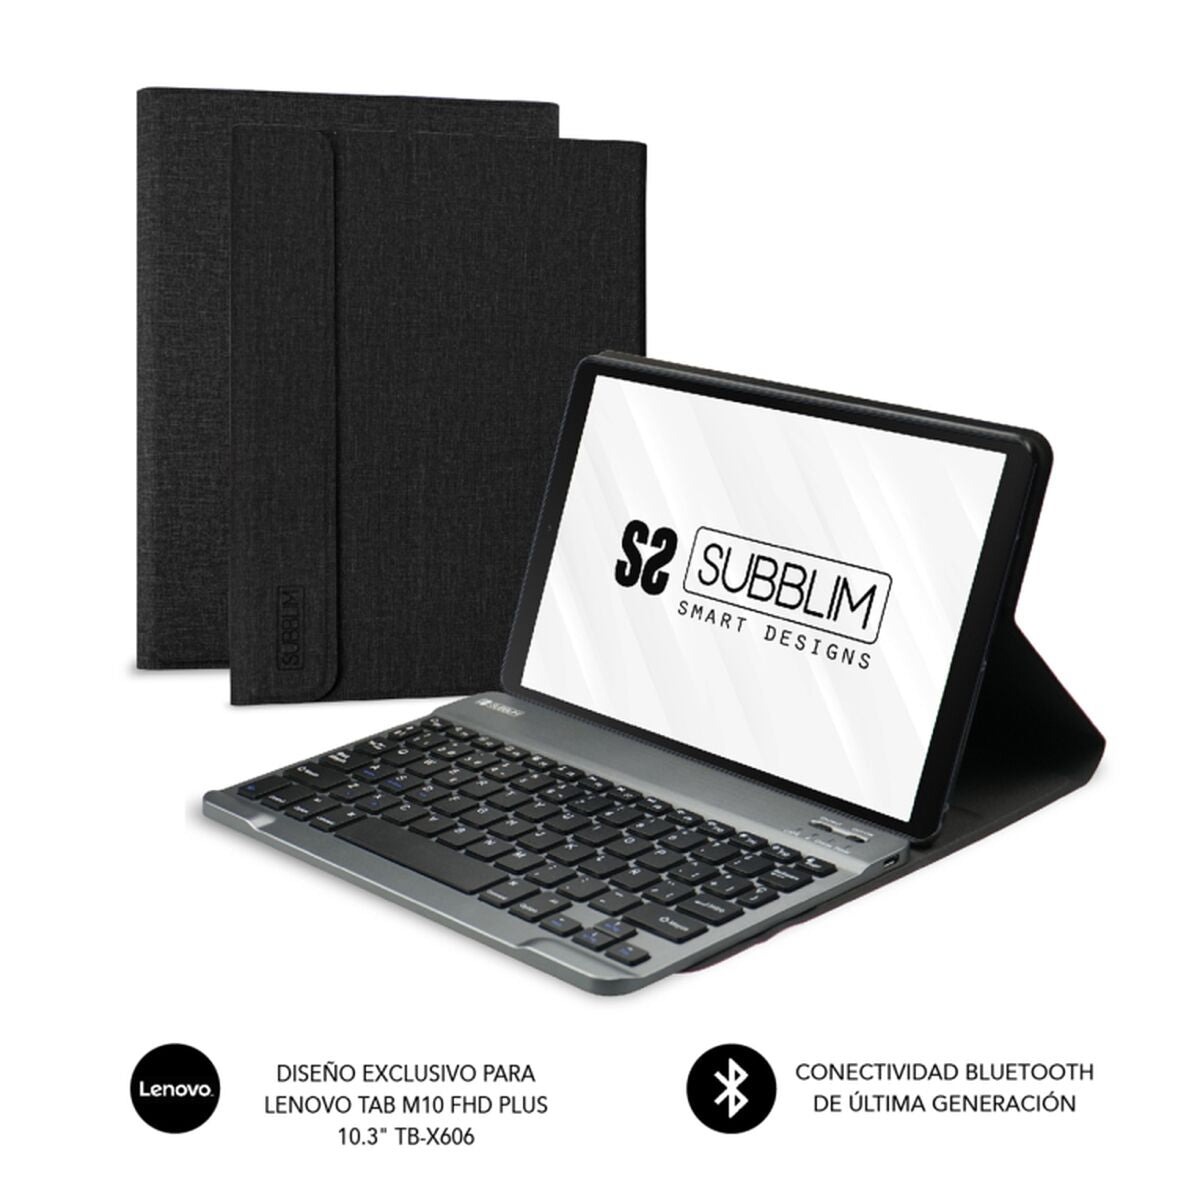 Case for Tablet and Keyboard Subblim KEYTAB PRO Black Spanish Qwerty QWERTY